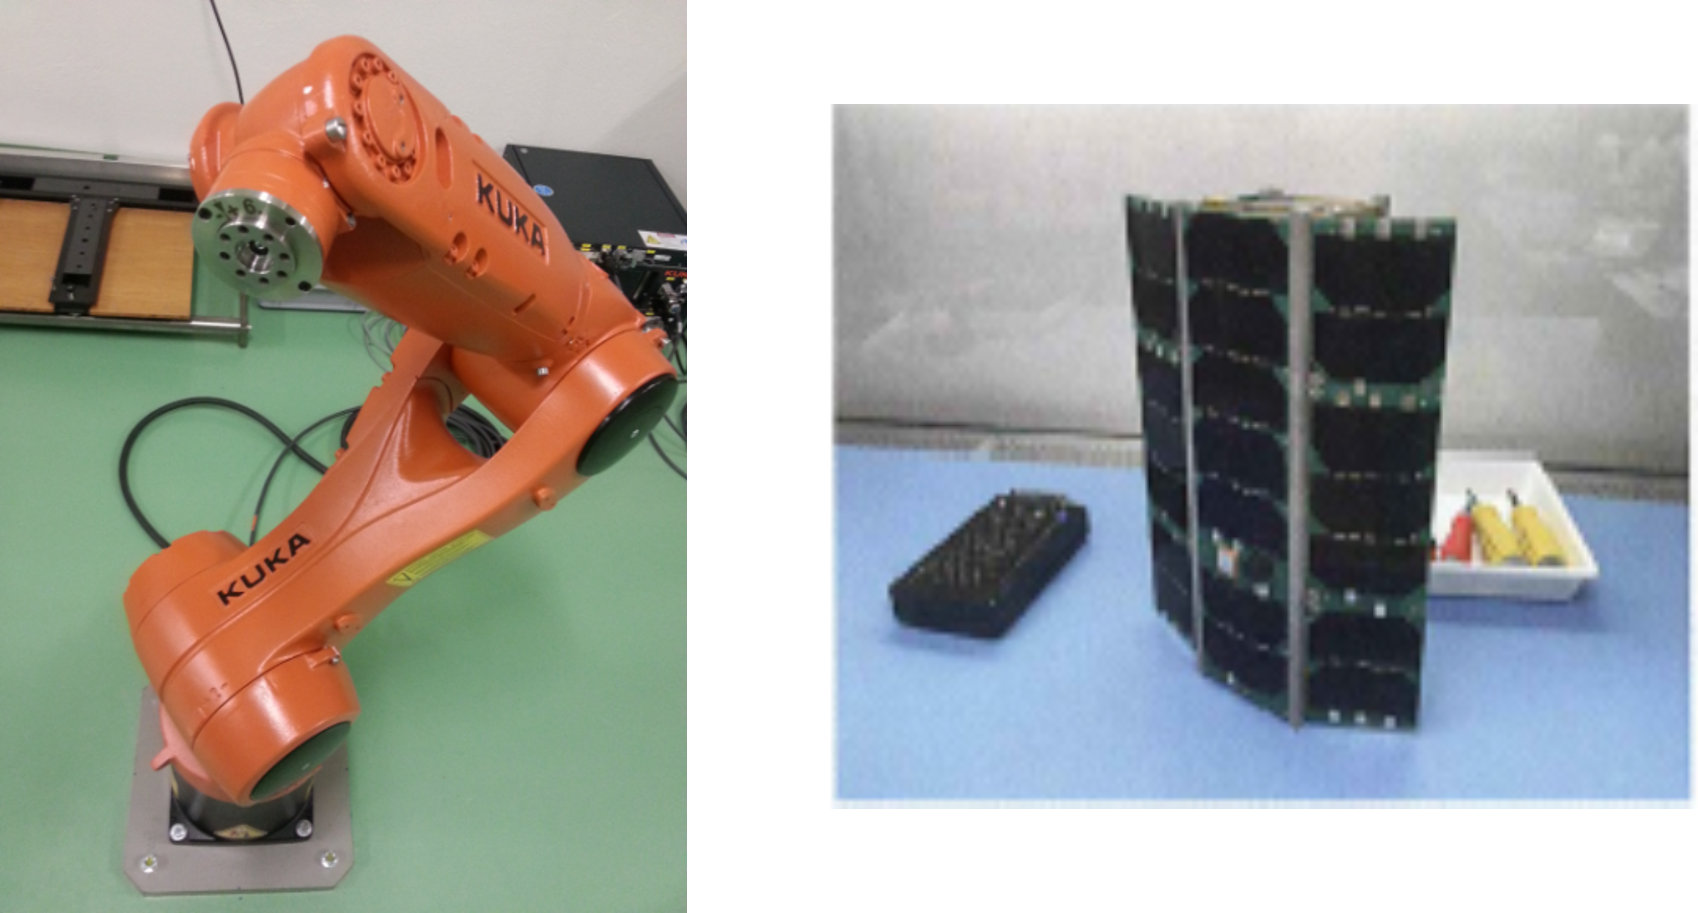 Enlarged view: Kuka industrial robot and Astrocast cube satellite